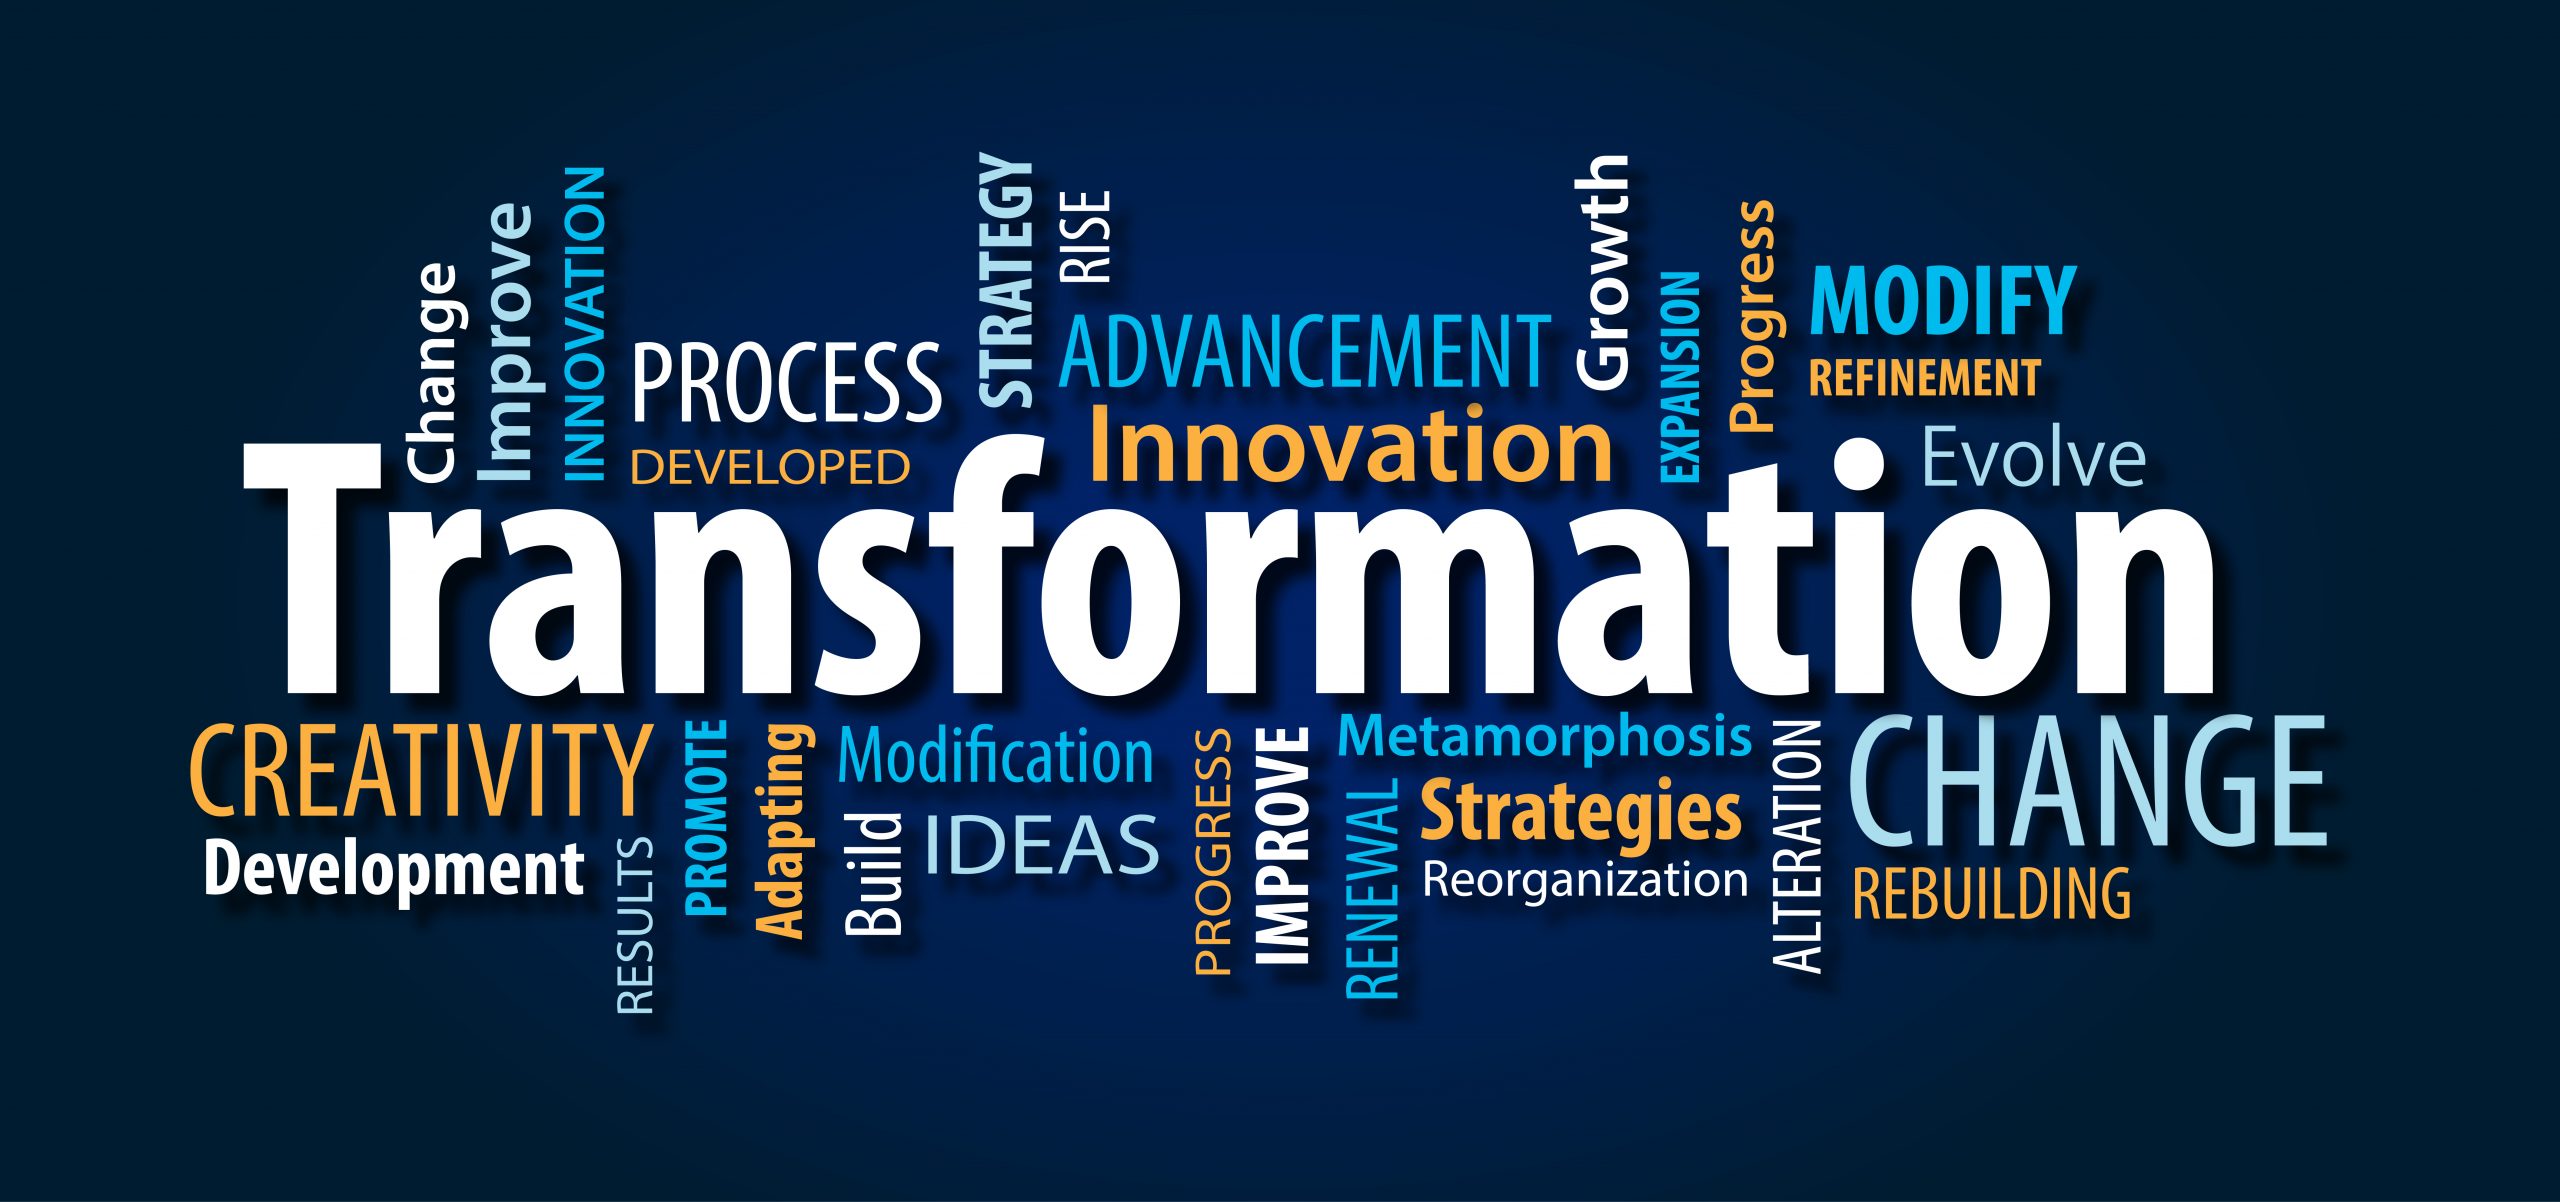 A word cloud focused on the theme of "Transformation" with associated words such as "Change," "Innovation," "Process," "Strategy," "Creativity," and "Growth" in varying font sizes and orientations, set against a deep blue background.